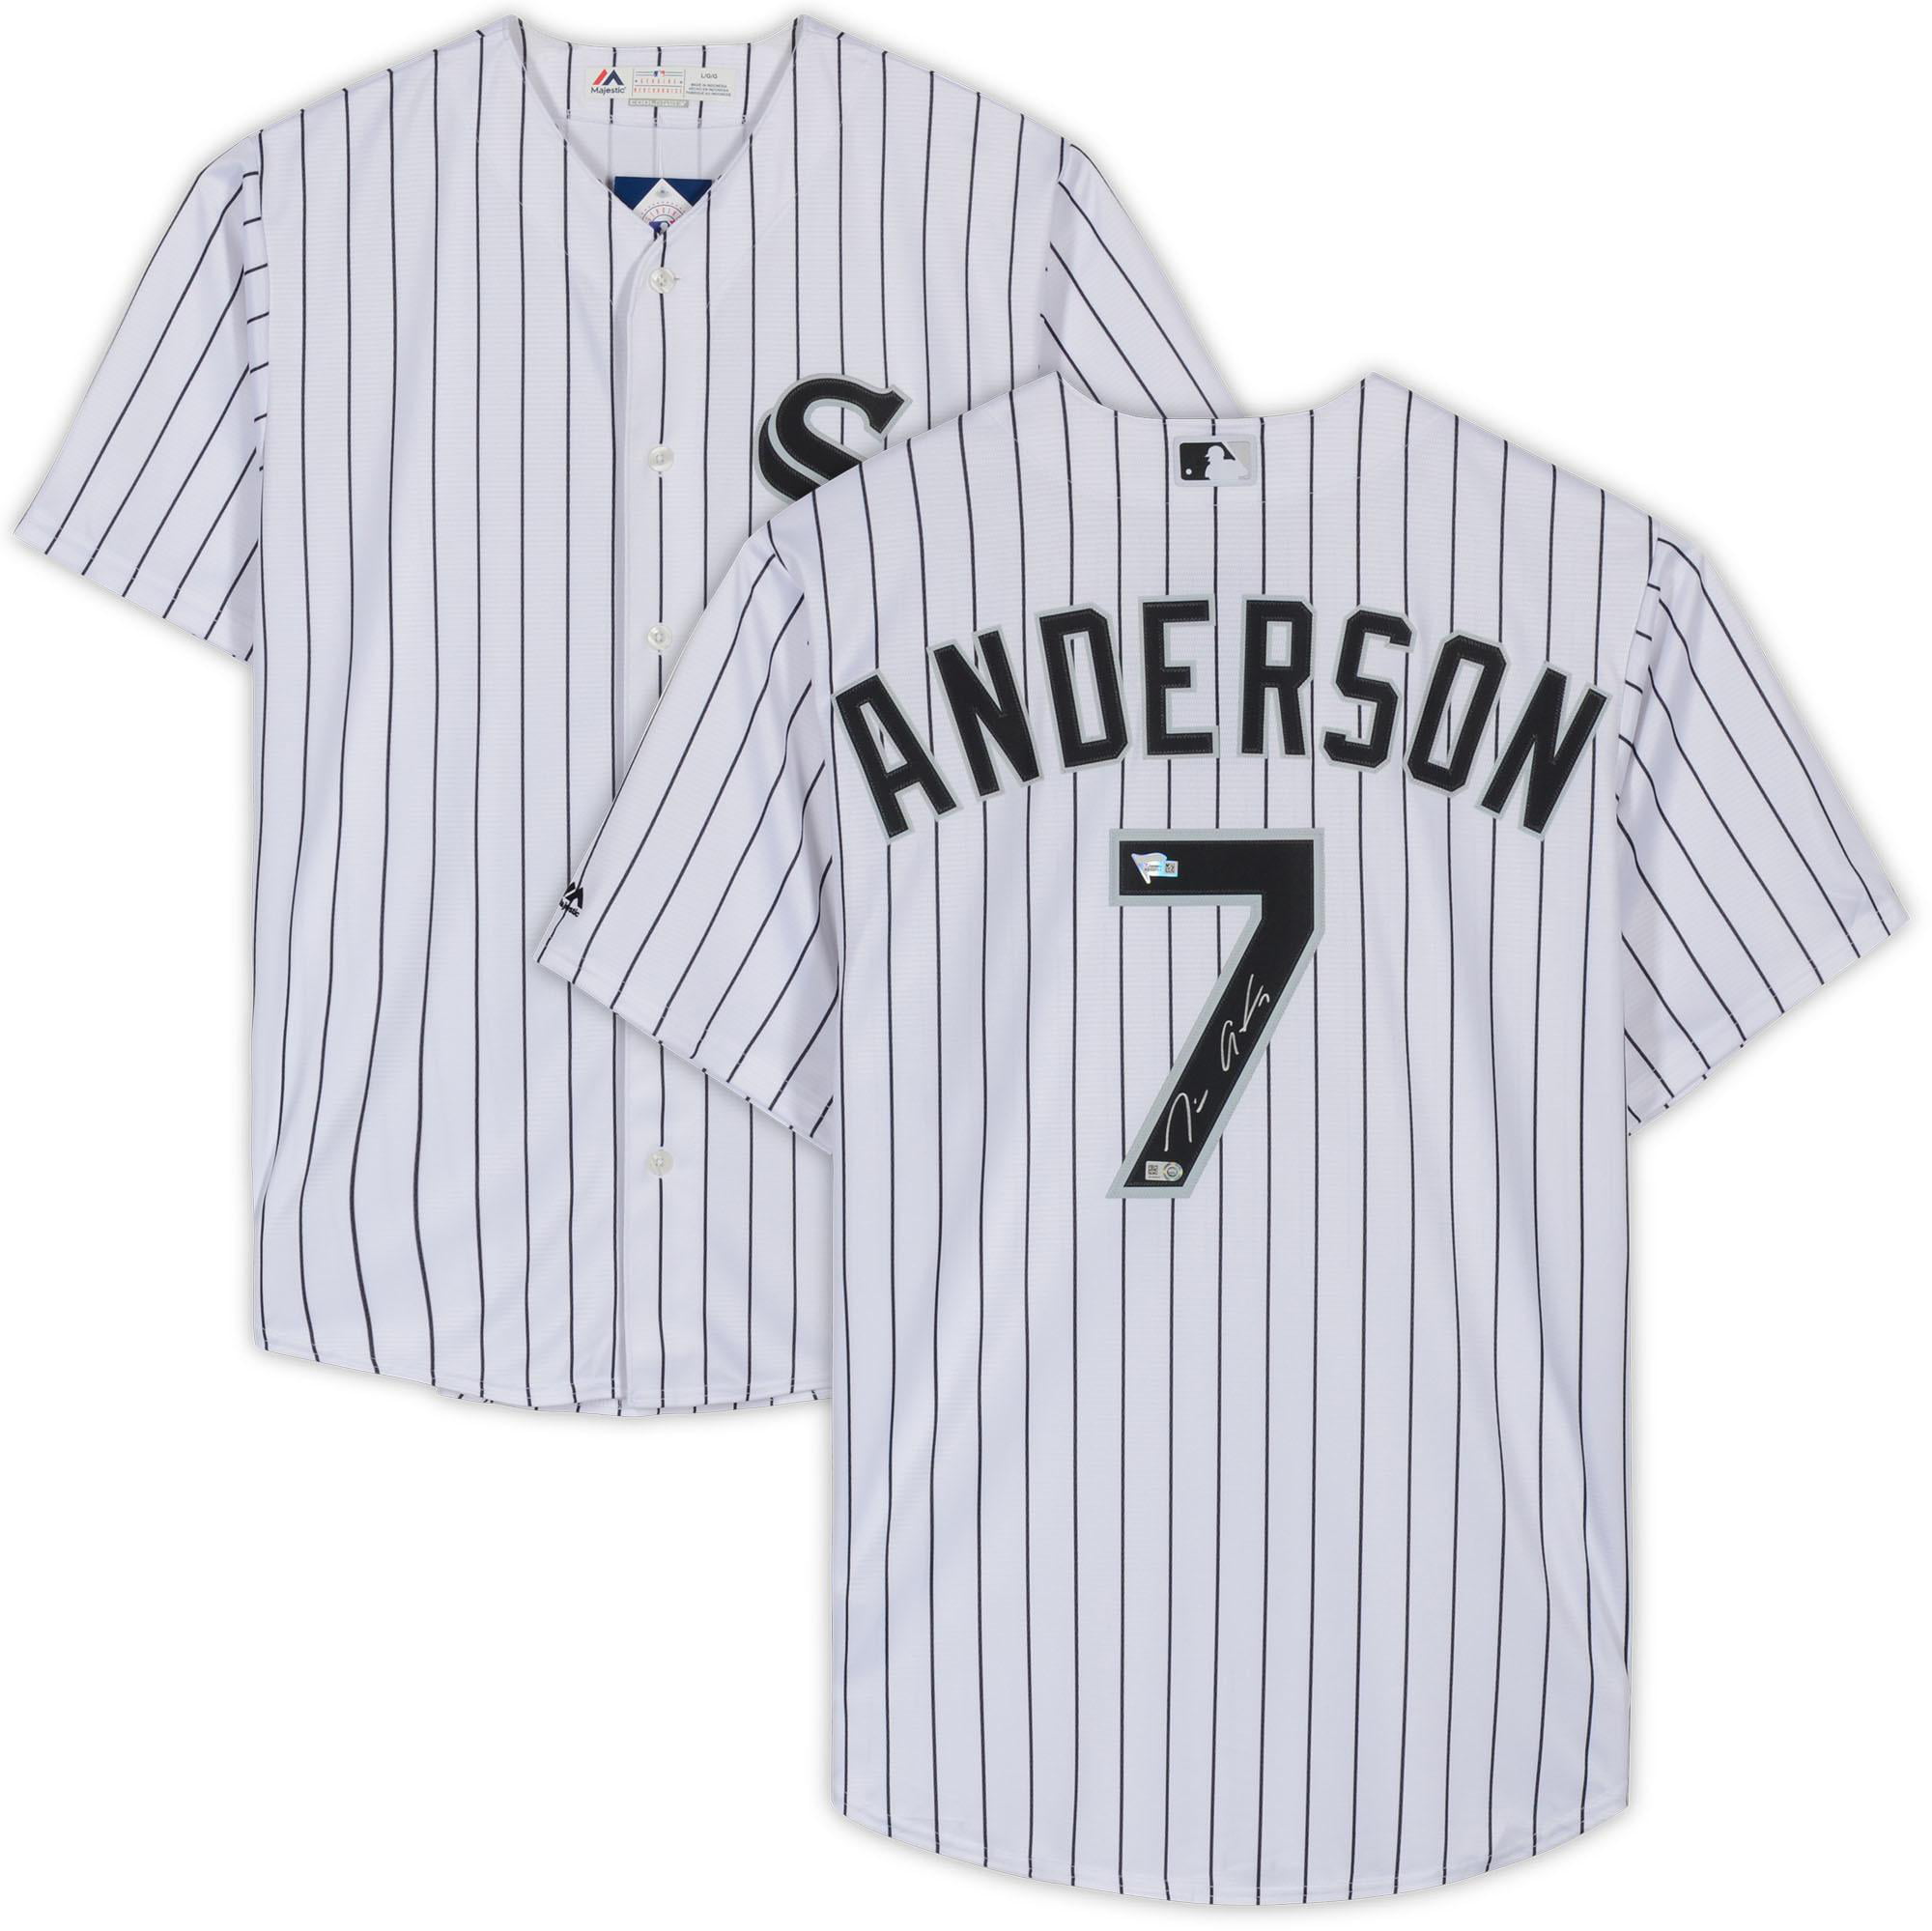 tim anderson authentic jersey